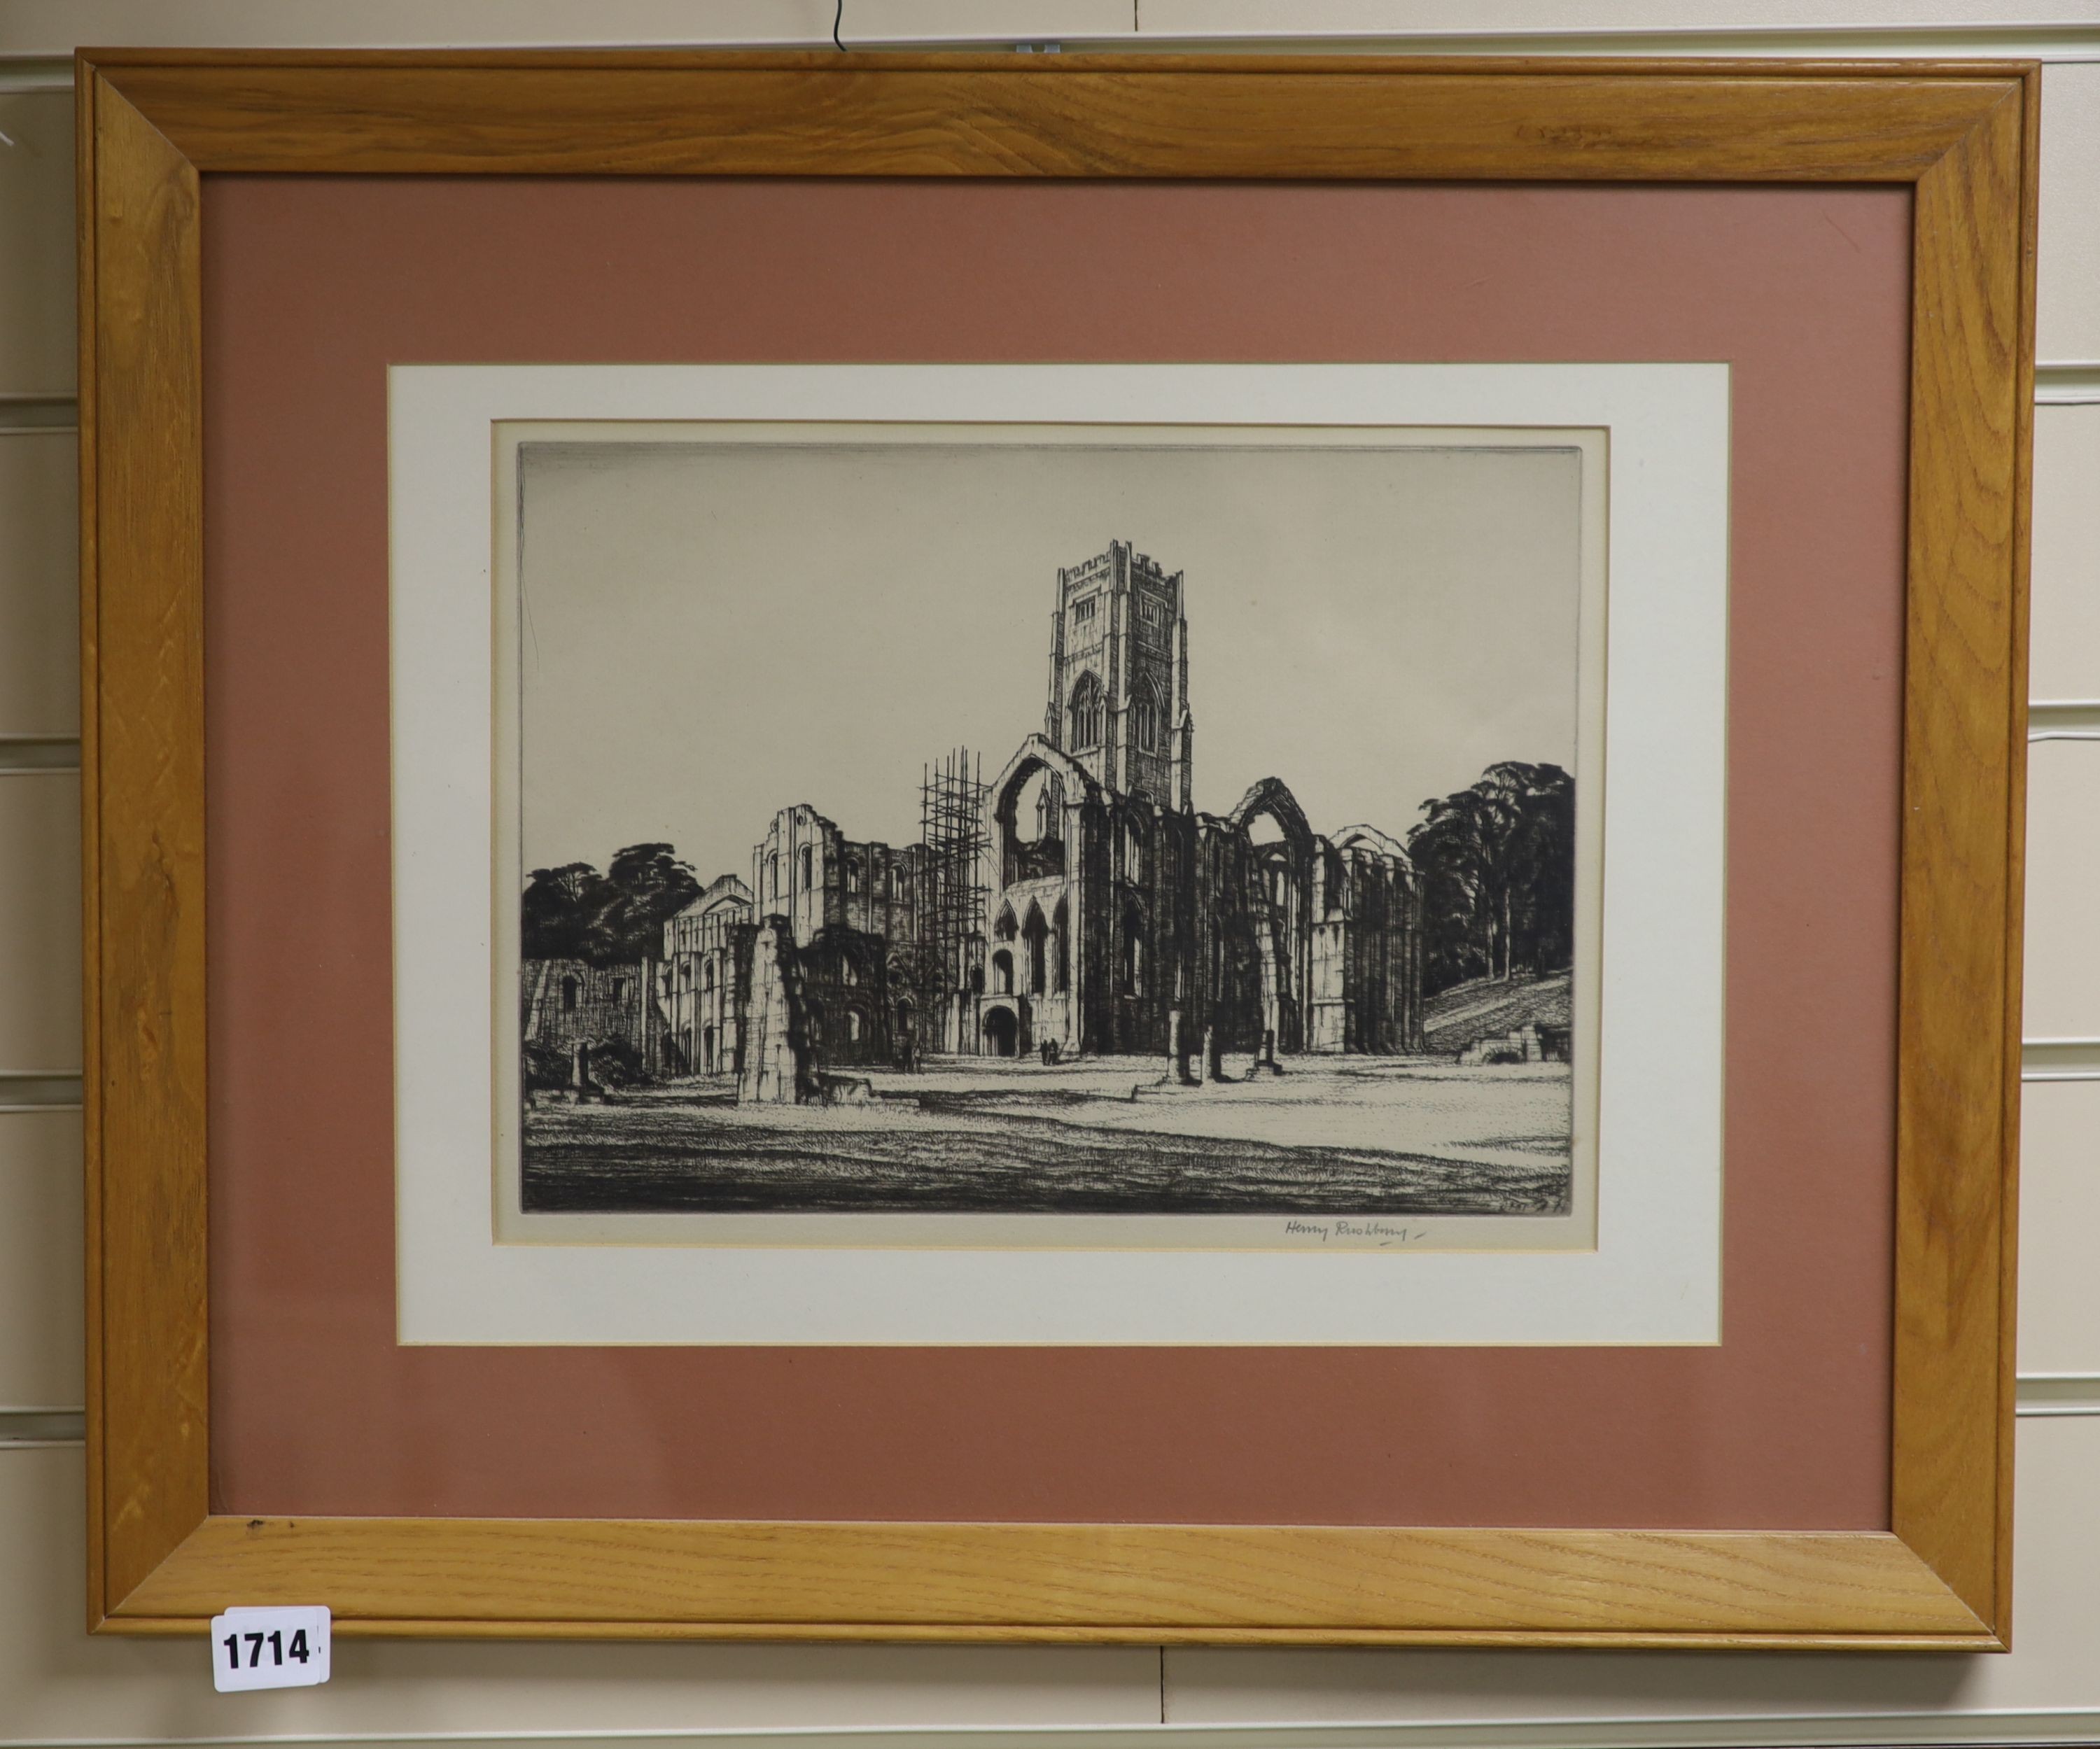 Henry Rushbury (1889-1968), etching, Abbey Ruins, signed, 22 x 31cm